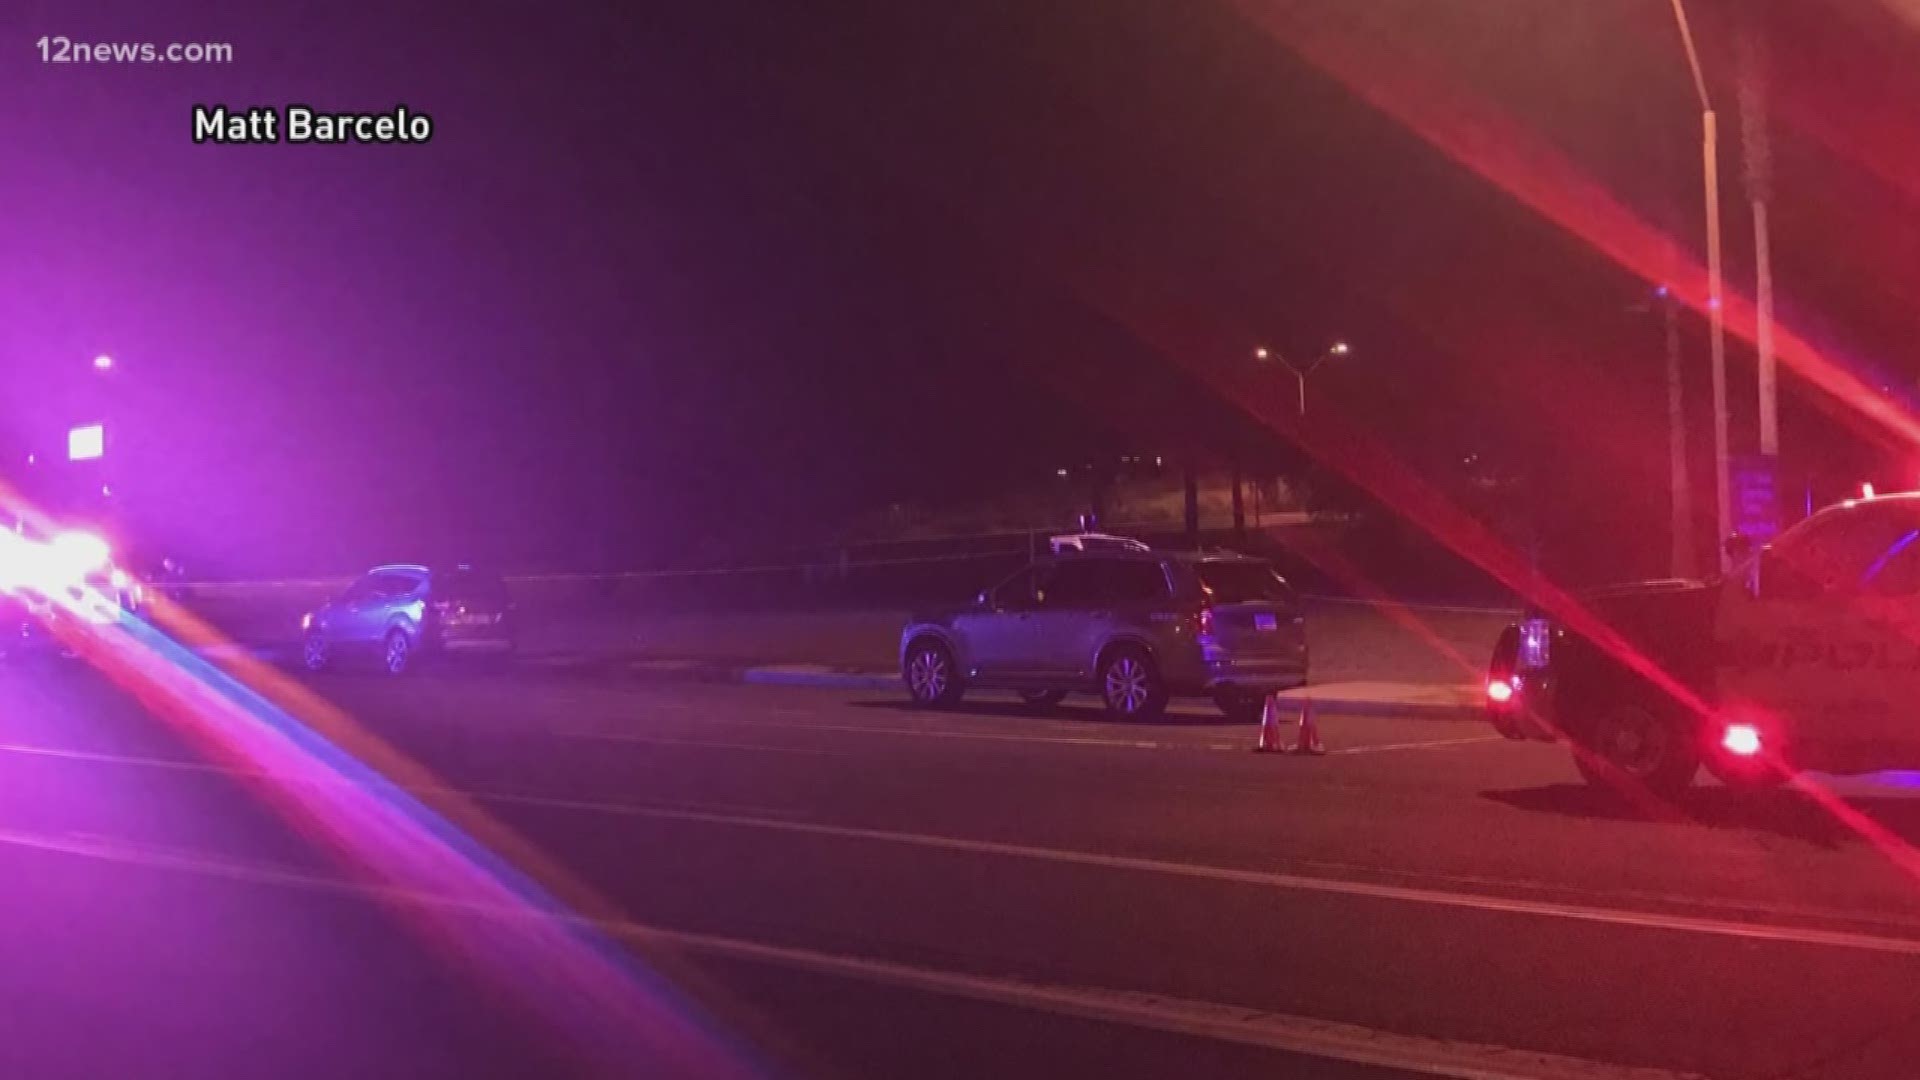 The Tempe Police Department says a woman is dead after being hit by a Uber self-driving vehicle Sunday night. The woman is believed to be the first pedestrian killed by a self-driving vehicle in the U.S.